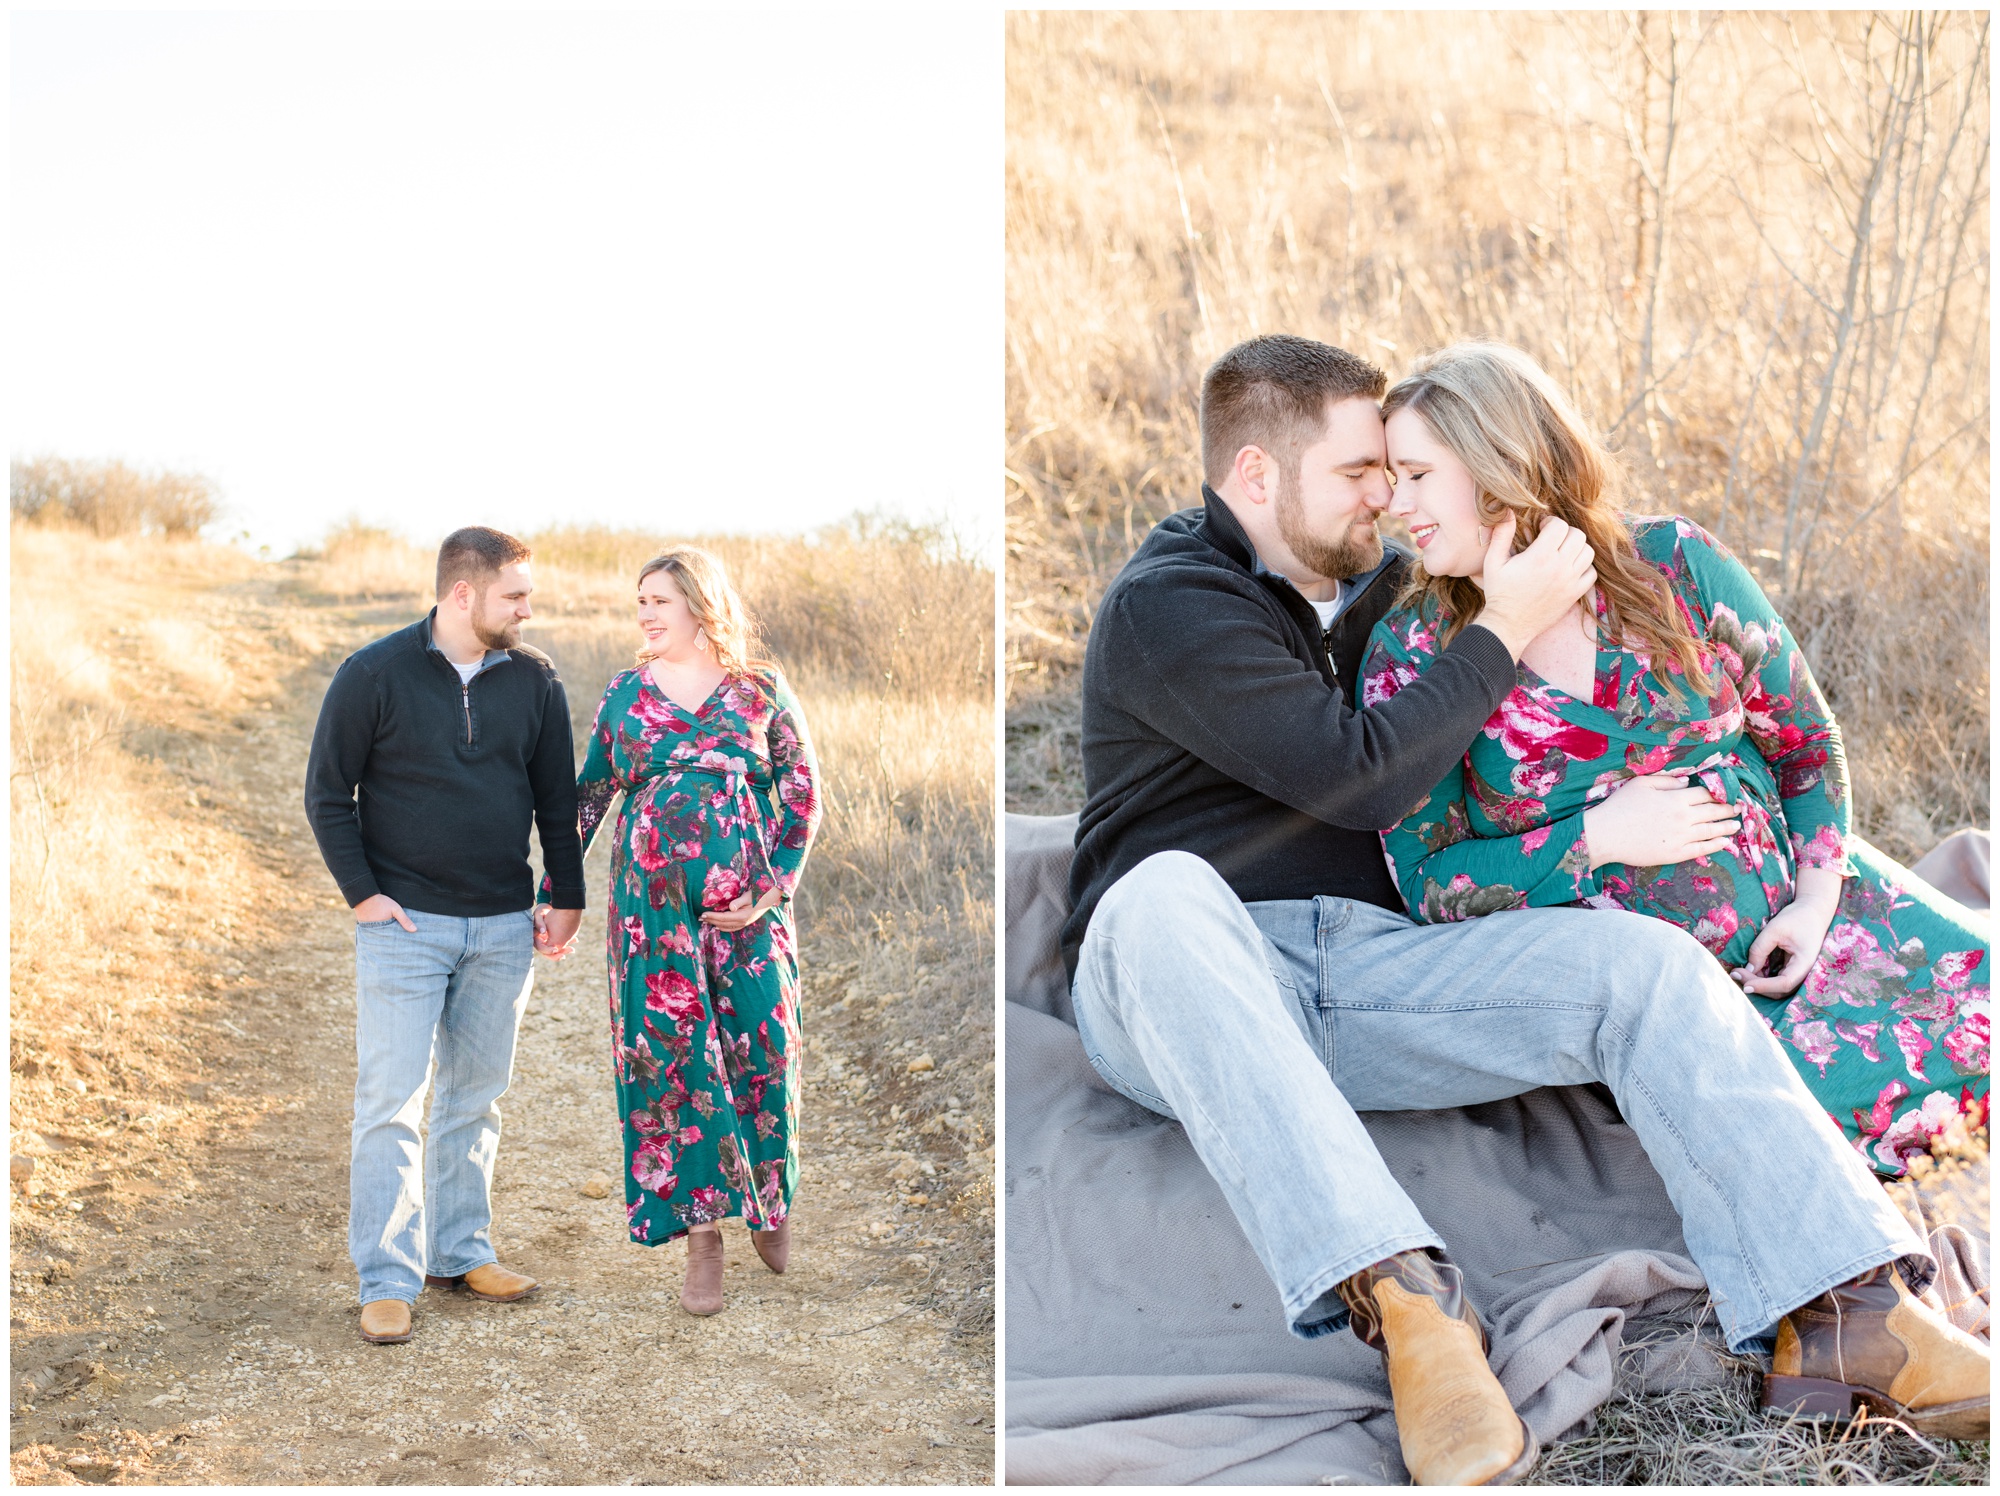 Tandy Hills Natural Area | Fort Worth Maternity Session | Fort Worth Maternity Photographer | Fort Worth Newborn Photographer | Fort Worth Family Photographer | Fort Worth Photographer | Lauren Grimes Photography